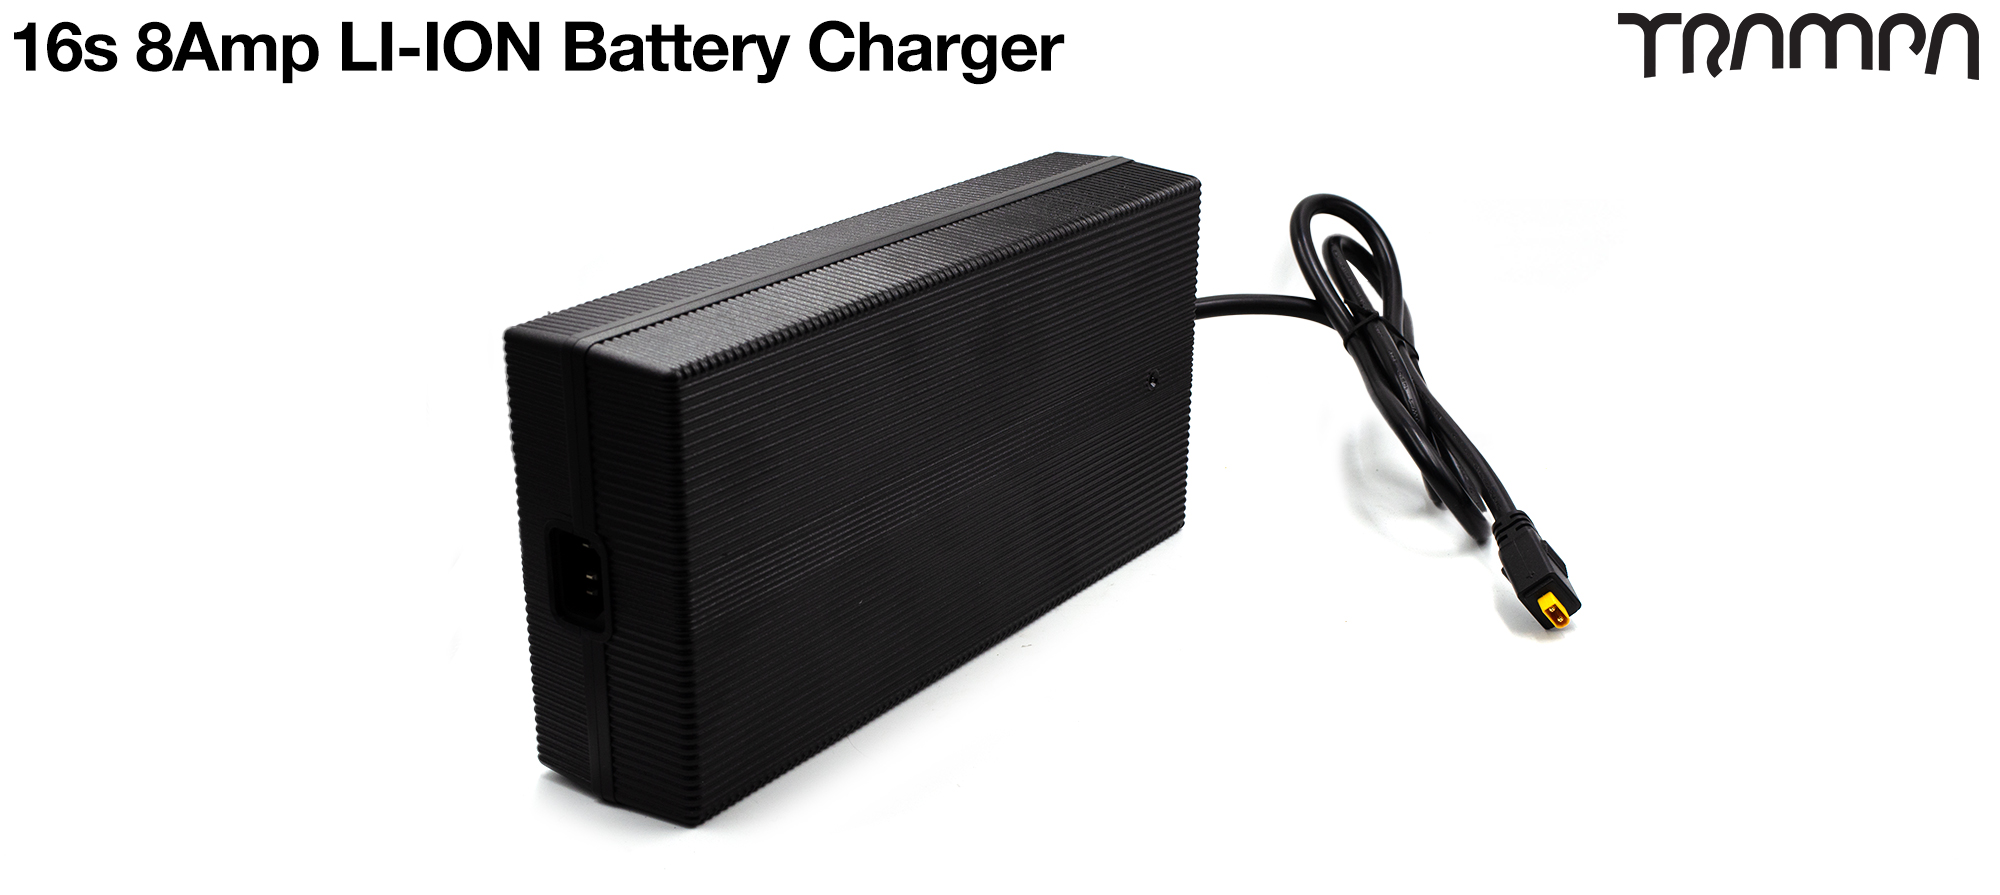 18s 8Amp LI-ION Battery Charger